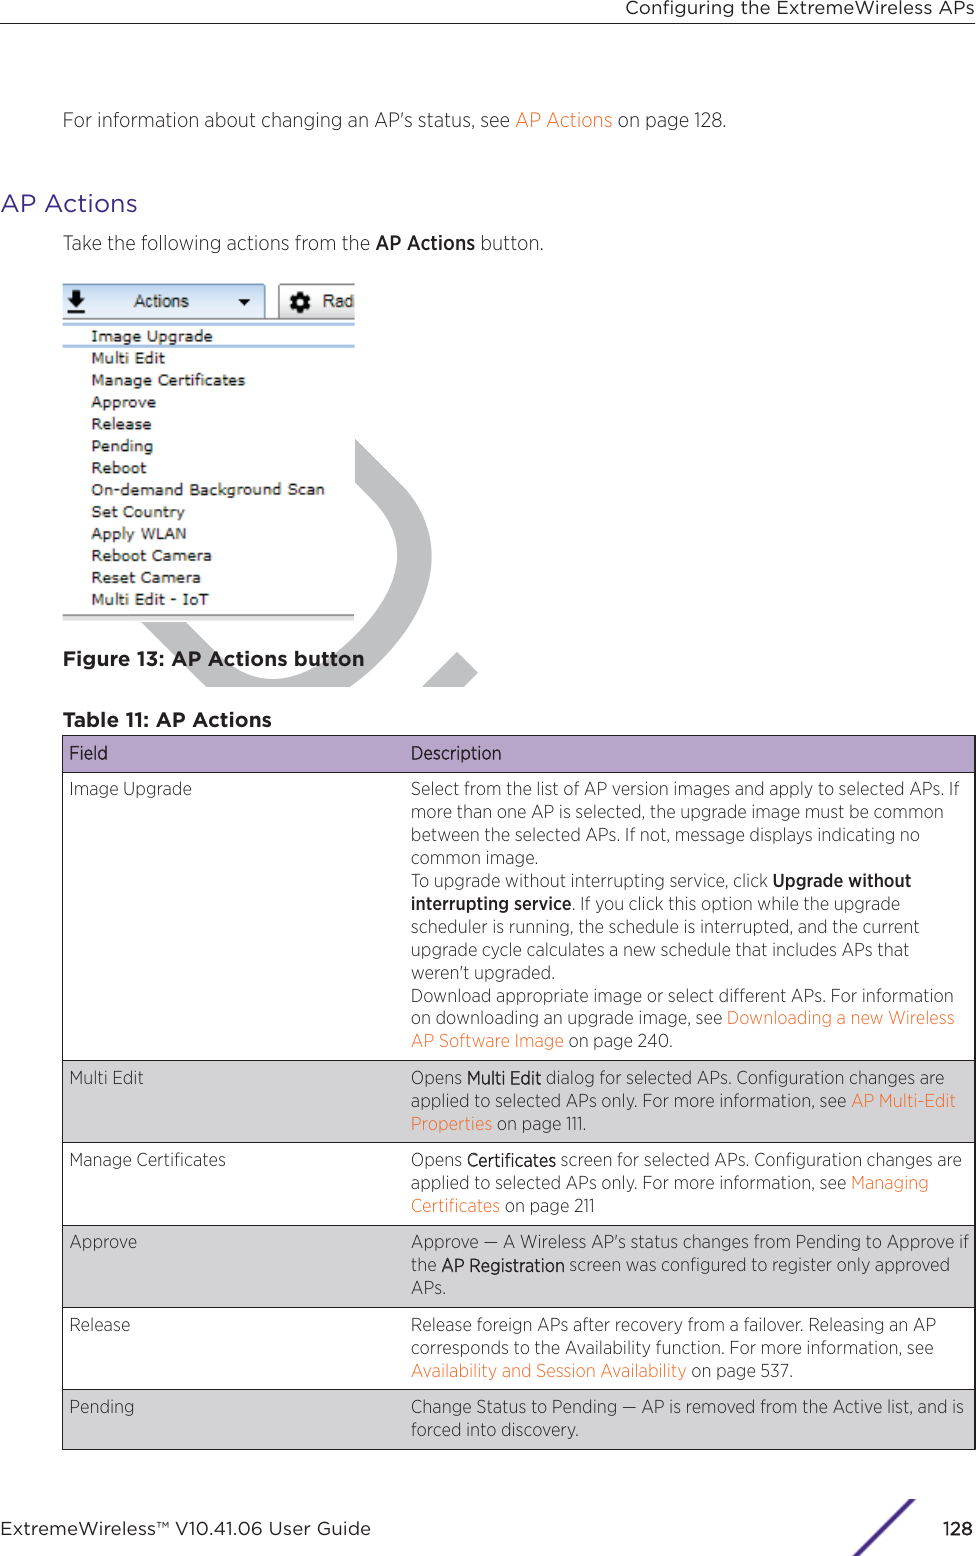 DraftFor information about changing an AP&apos;s status, see AP Actions on page 128.AP ActionsTake the following actions from the AP Actions button.Figure 13: AP Actions buttonTable 11: AP ActionsFField DescriptionImage Upgrade Select from the list of AP version images and apply to selected APs. Ifmore than one AP is selected, the upgrade image must be commonbetween the selected APs. If not, message displays indicating nocommon image.To upgrade without interrupting service, click Upgrade withoutinterrupting service. If you click this option while the upgradescheduler is running, the schedule is interrupted, and the currentupgrade cycle calculates a new schedule that includes APs thatweren&apos;t upgraded.Download appropriate image or select dierent APs. For informationon downloading an upgrade image, see Downloading a new WirelessAP Software Image on page 240.Multi Edit Opens MMulti Edit dialog for selected APs. Conﬁguration changes areapplied to selected APs only. For more information, see AP Multi-EditProperties on page 111.Manage Certiﬁcates Opens CCertiﬁcates screen for selected APs. Conﬁguration changes areapplied to selected APs only. For more information, see ManagingCertiﬁcates on page 211Approve Approve — A Wireless AP&apos;s status changes from Pending to Approve ifthe AAP Registration screen was conﬁgured to register only approvedAPs.Release Release foreign APs after recovery from a failover. Releasing an APcorresponds to the Availability function. For more information, see Availability and Session Availability on page 537.Pending Change Status to Pending — AP is removed from the Active list, and isforced into discovery.Conﬁguring the ExtremeWireless APsExtremeWireless™ V10.41.06 User Guide128